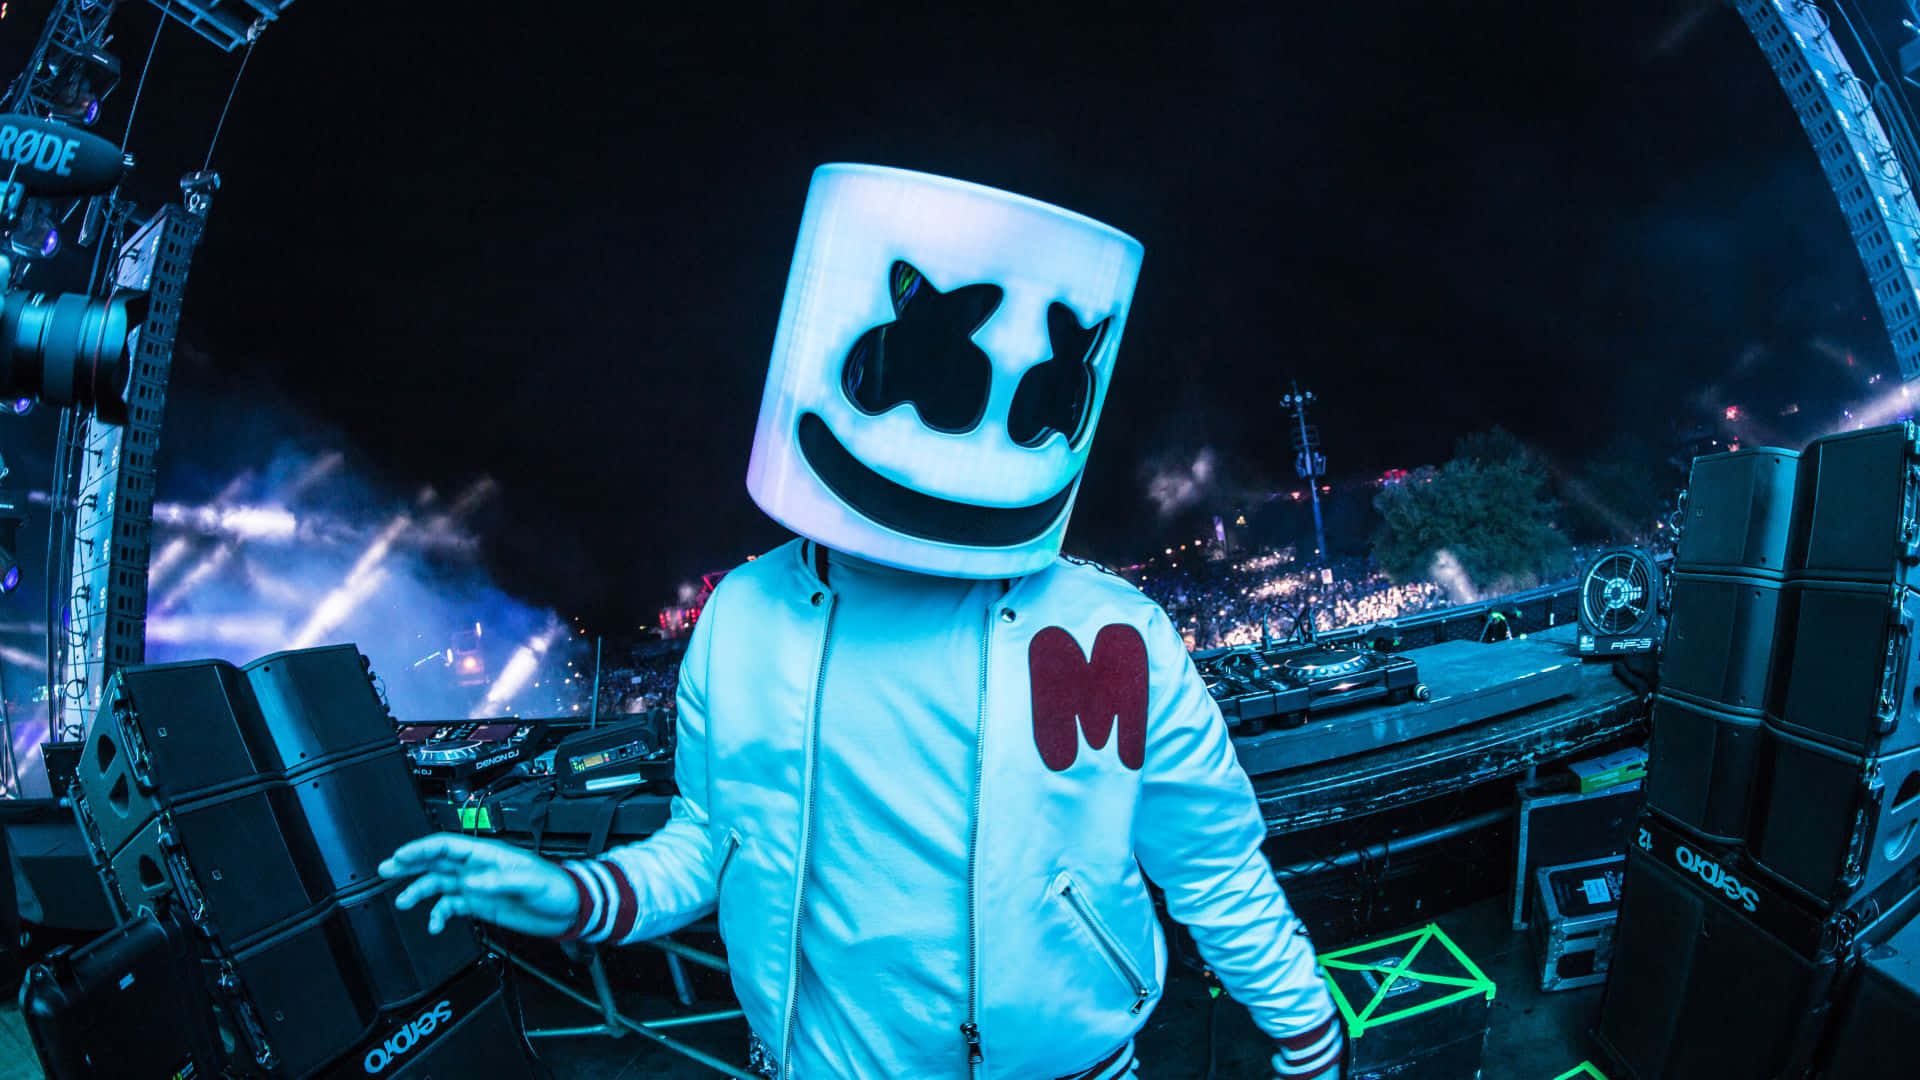 Marshmello, the Electronic Dance Music producer who wears a unique marshmallow-like mask